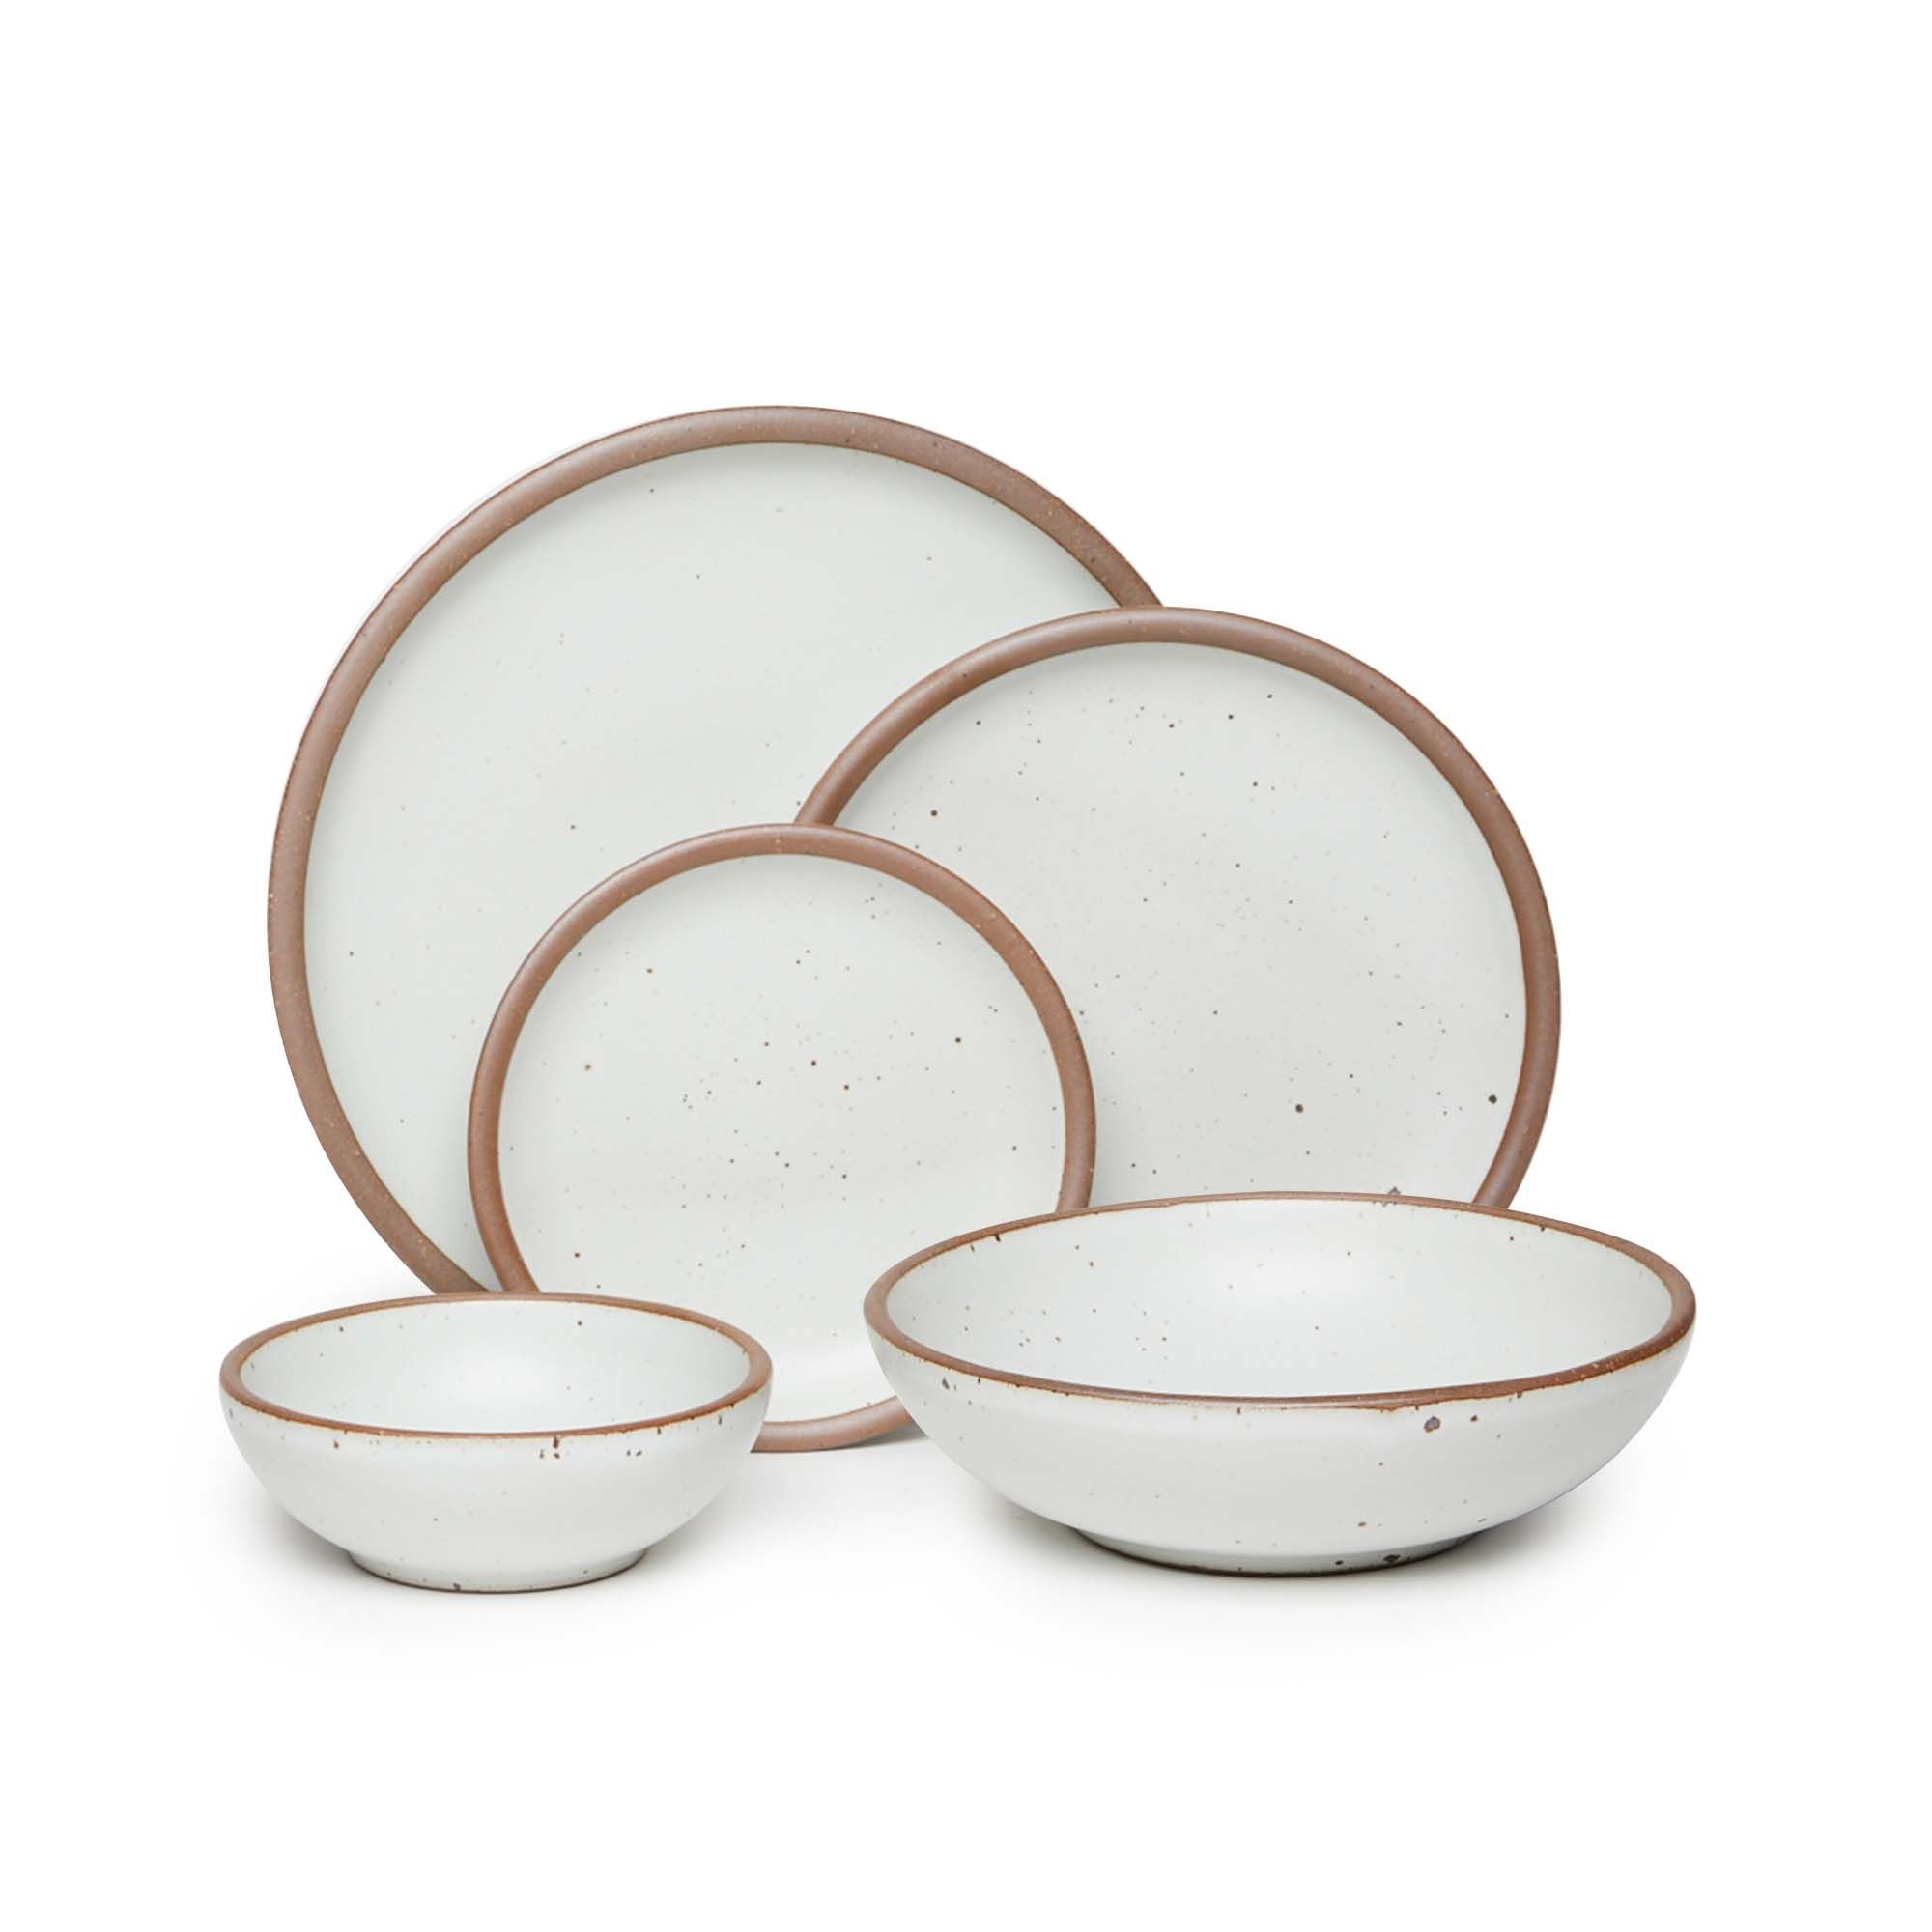 A breakfast bowl, everyday bowl, cake plate, side plate and dinner plate paired together in a cool white featuring iron speckles